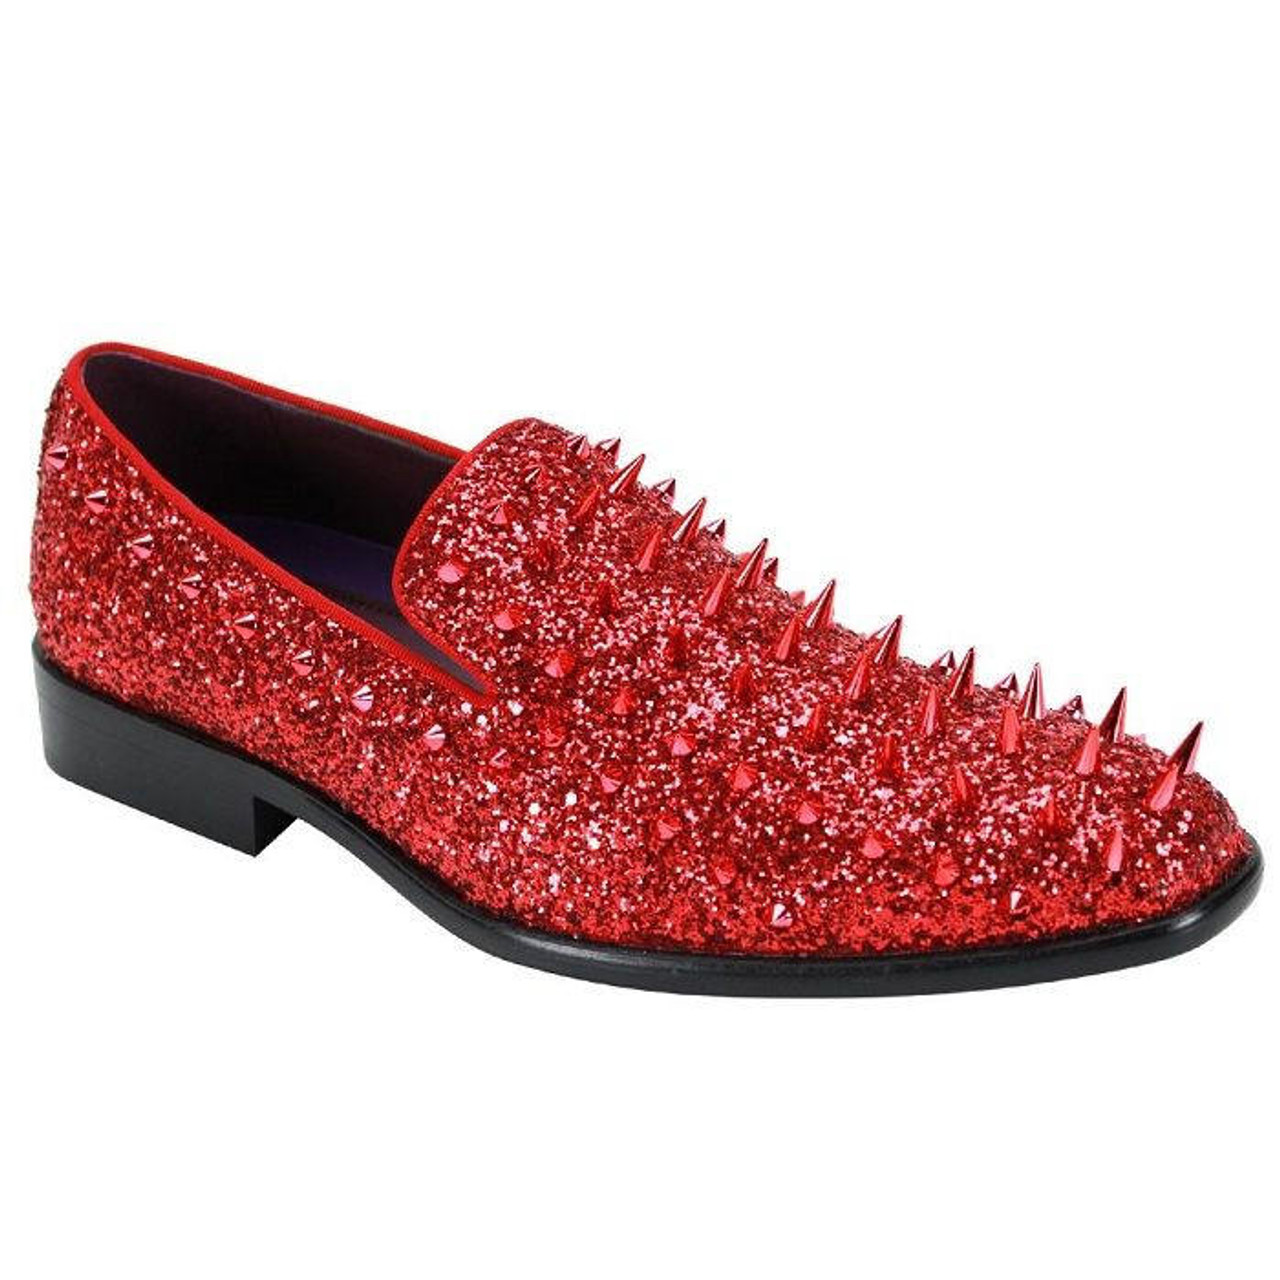 All Red Bottom Dress Shoes Collection